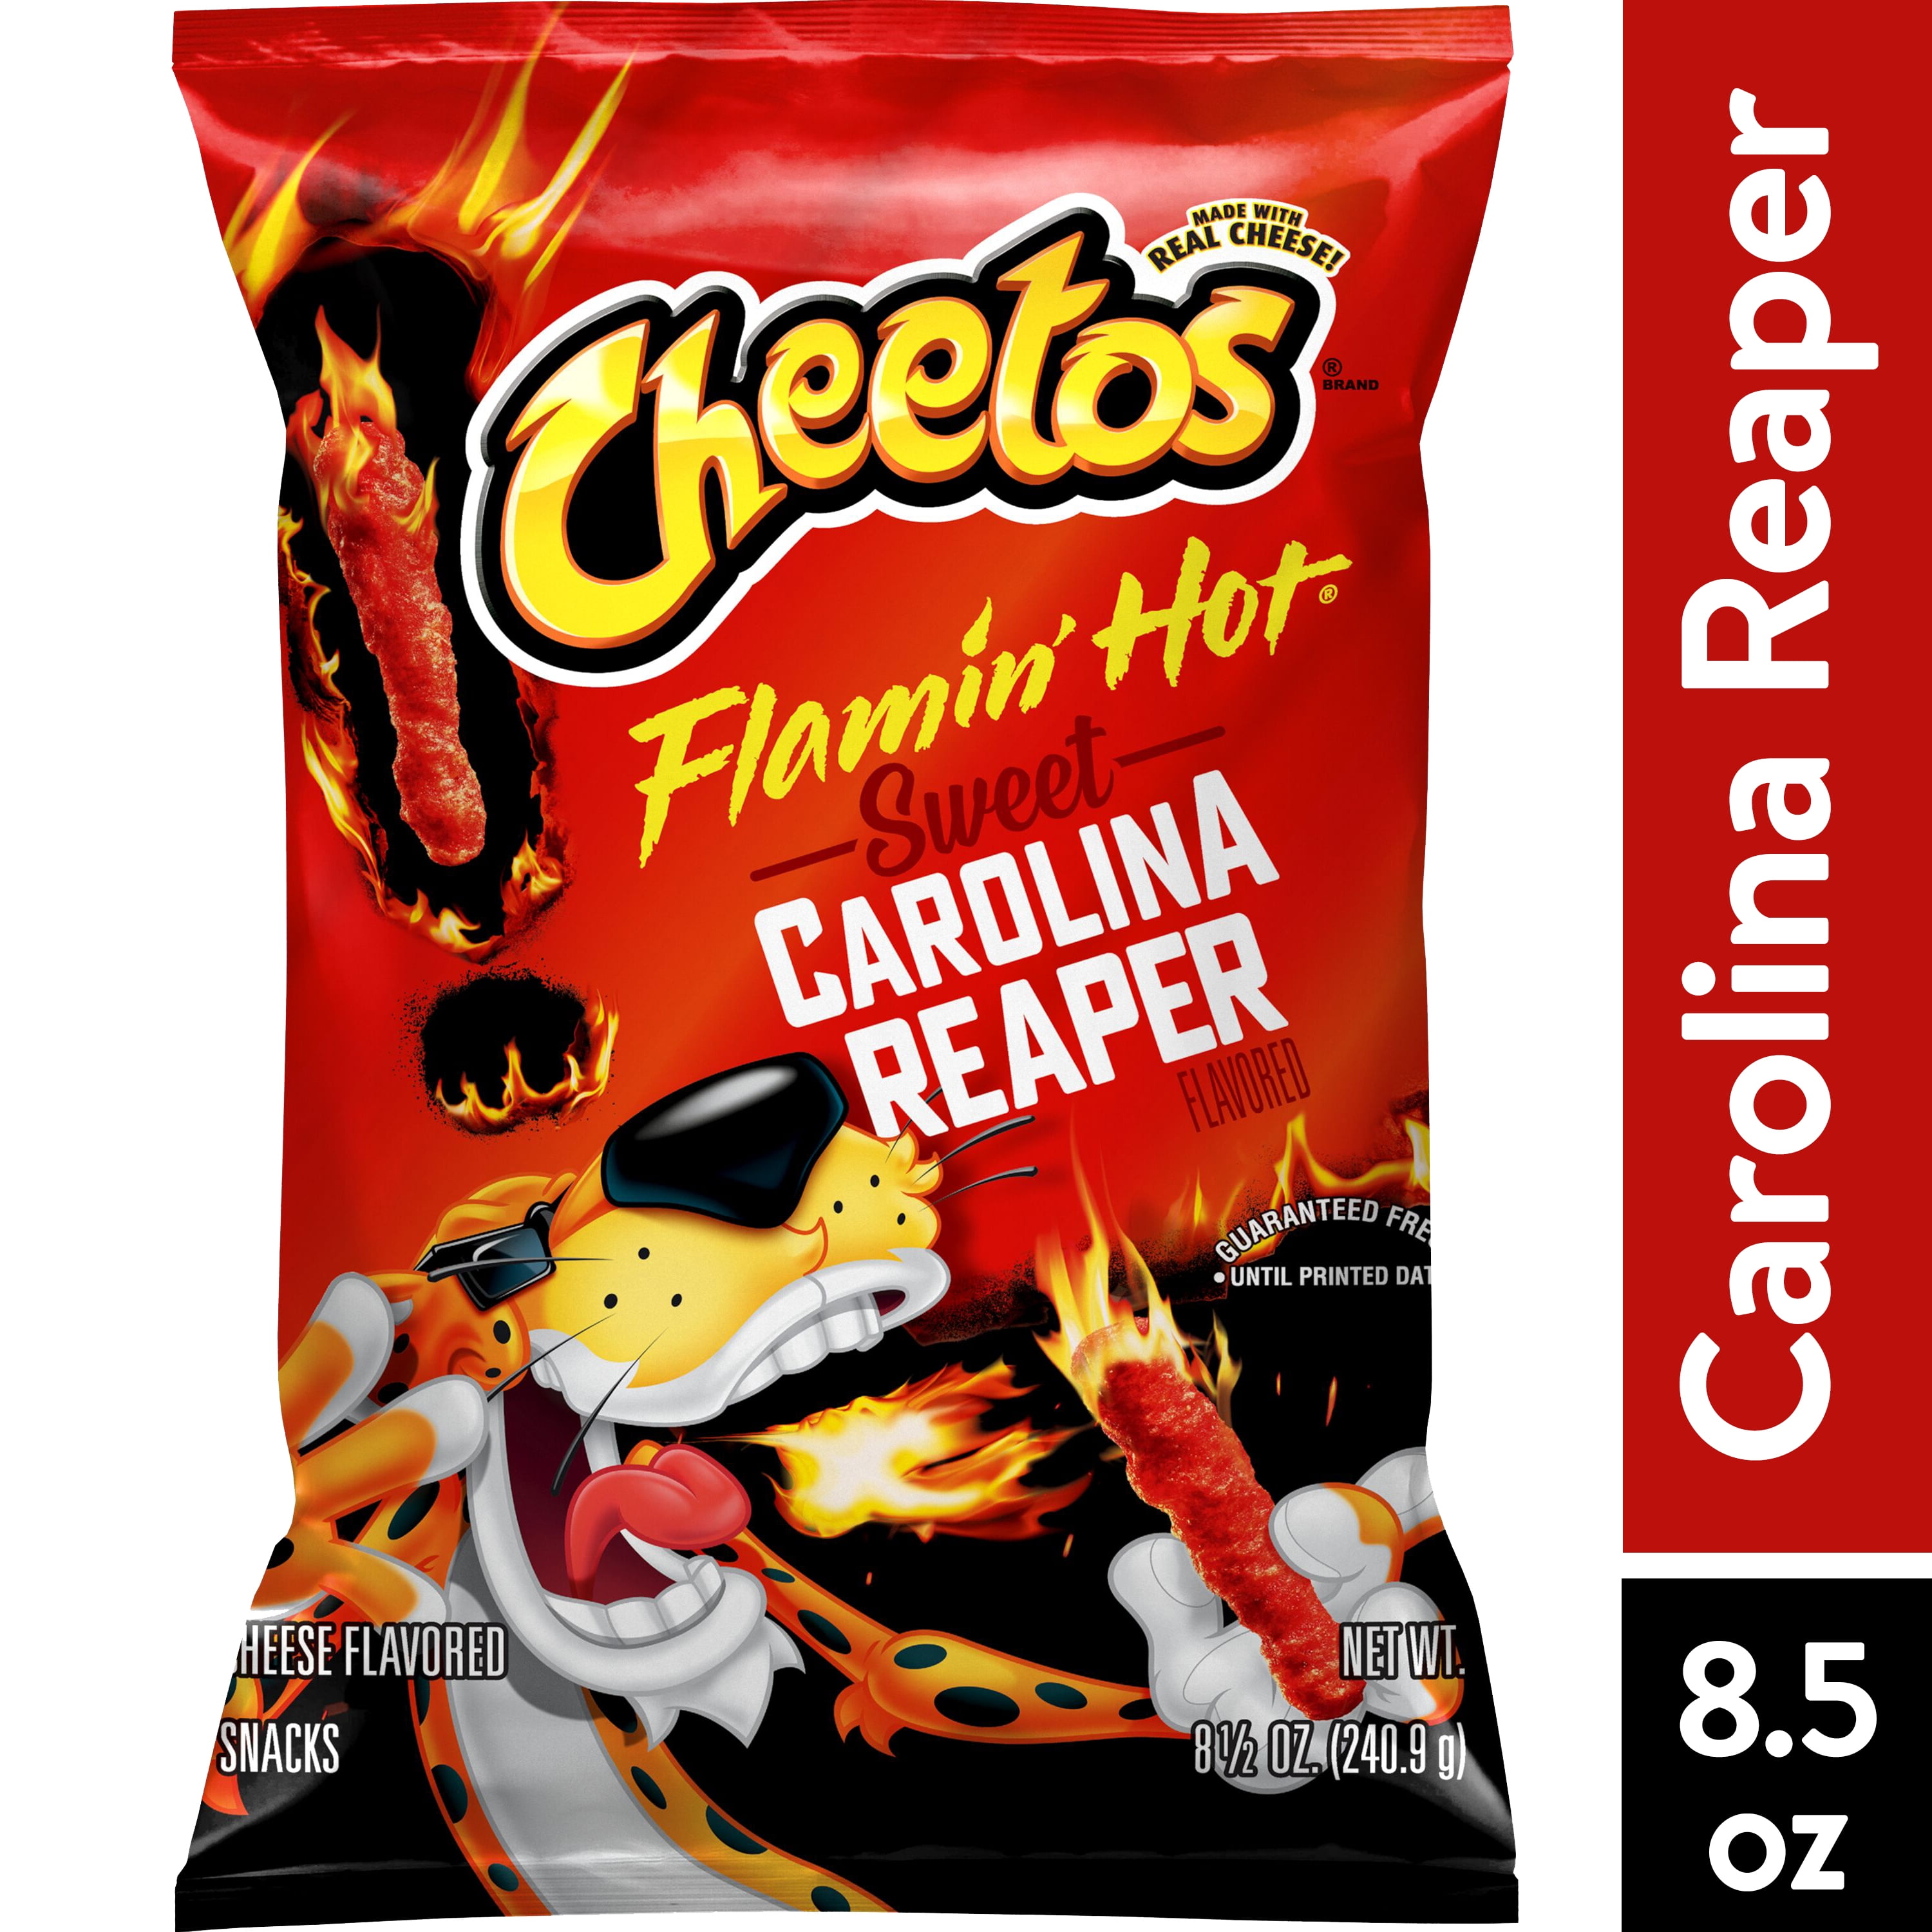 Buy Cheetos Flamin Hot Sweet Reaper Cheese Puffs 85 Oz Online At Lowest Price In Australia